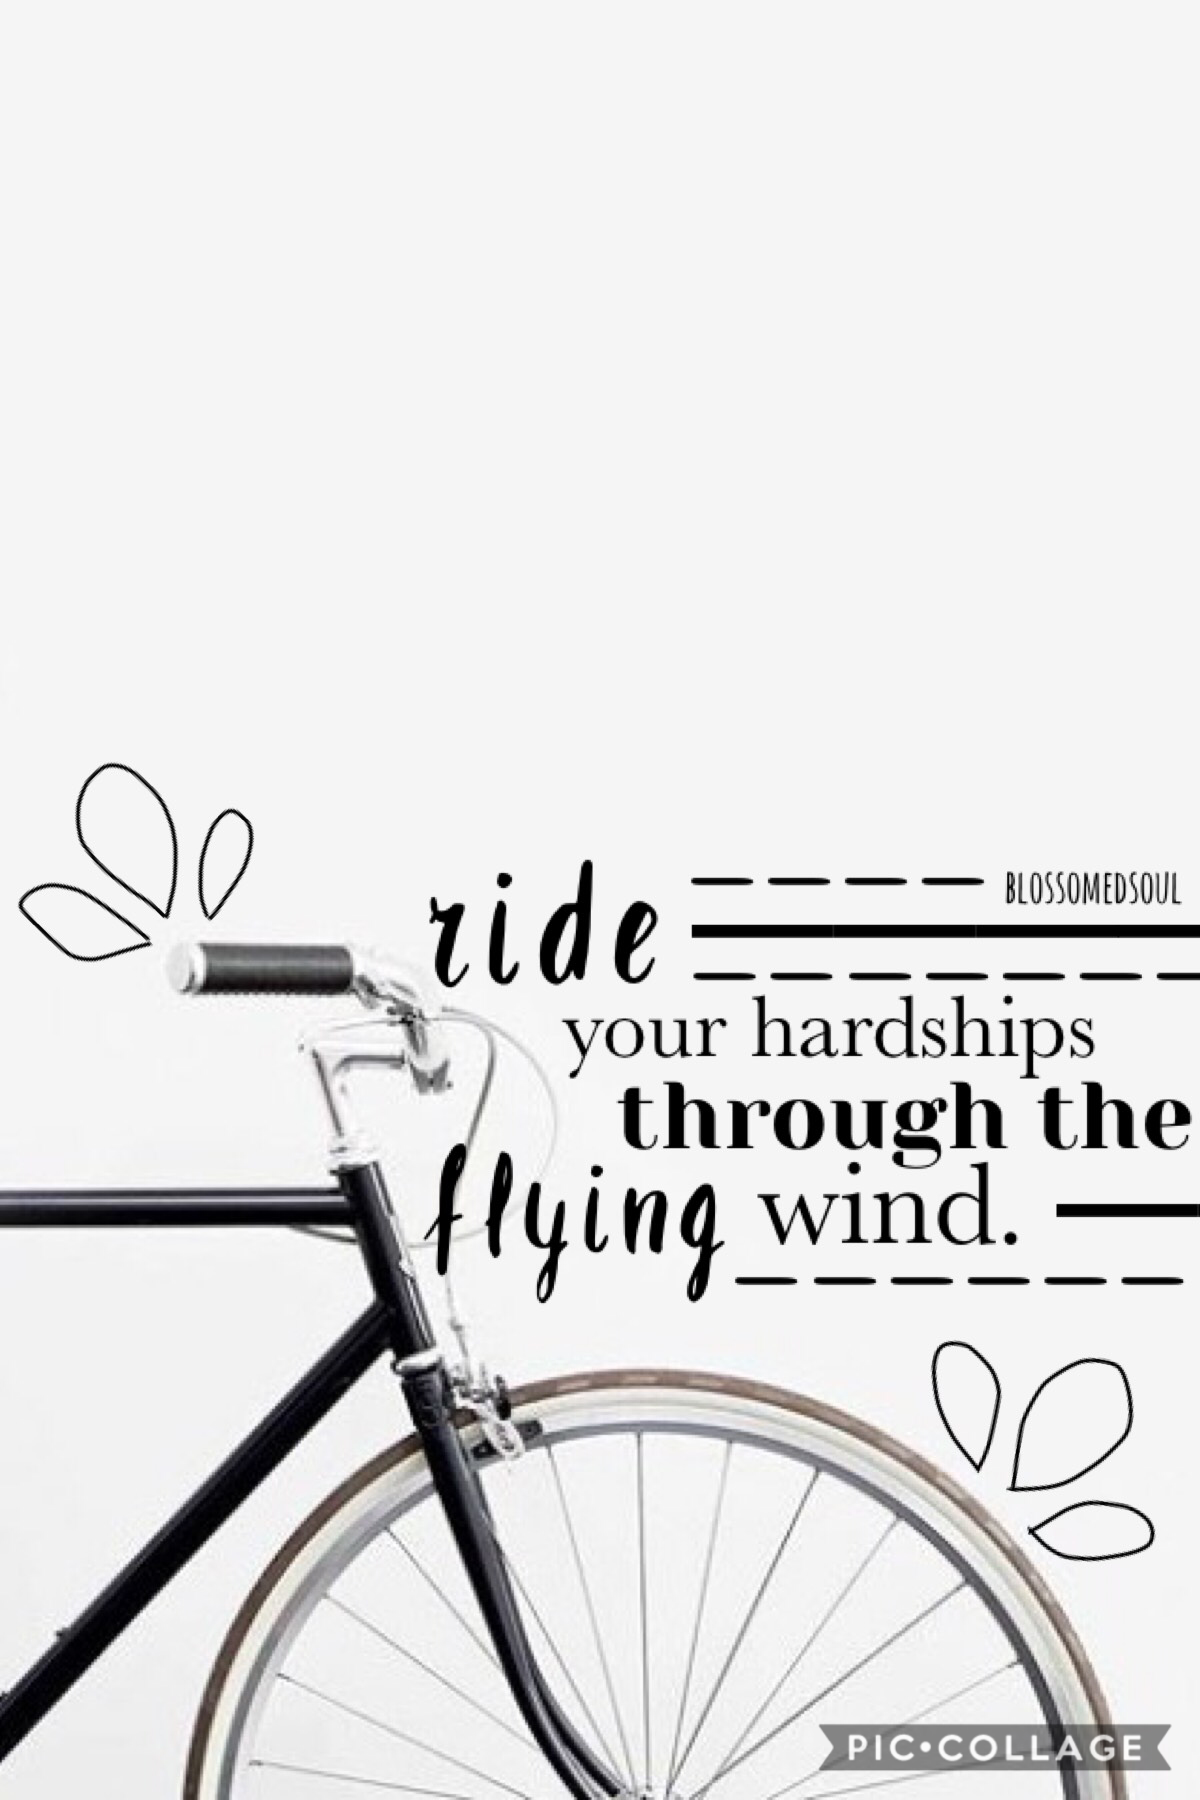 t a p

sorry i haven’t posted in a bit! been busy with school ♥️ loving the new fonts, are you? qotd: bike or stationary bike? aotd: bike 🌿